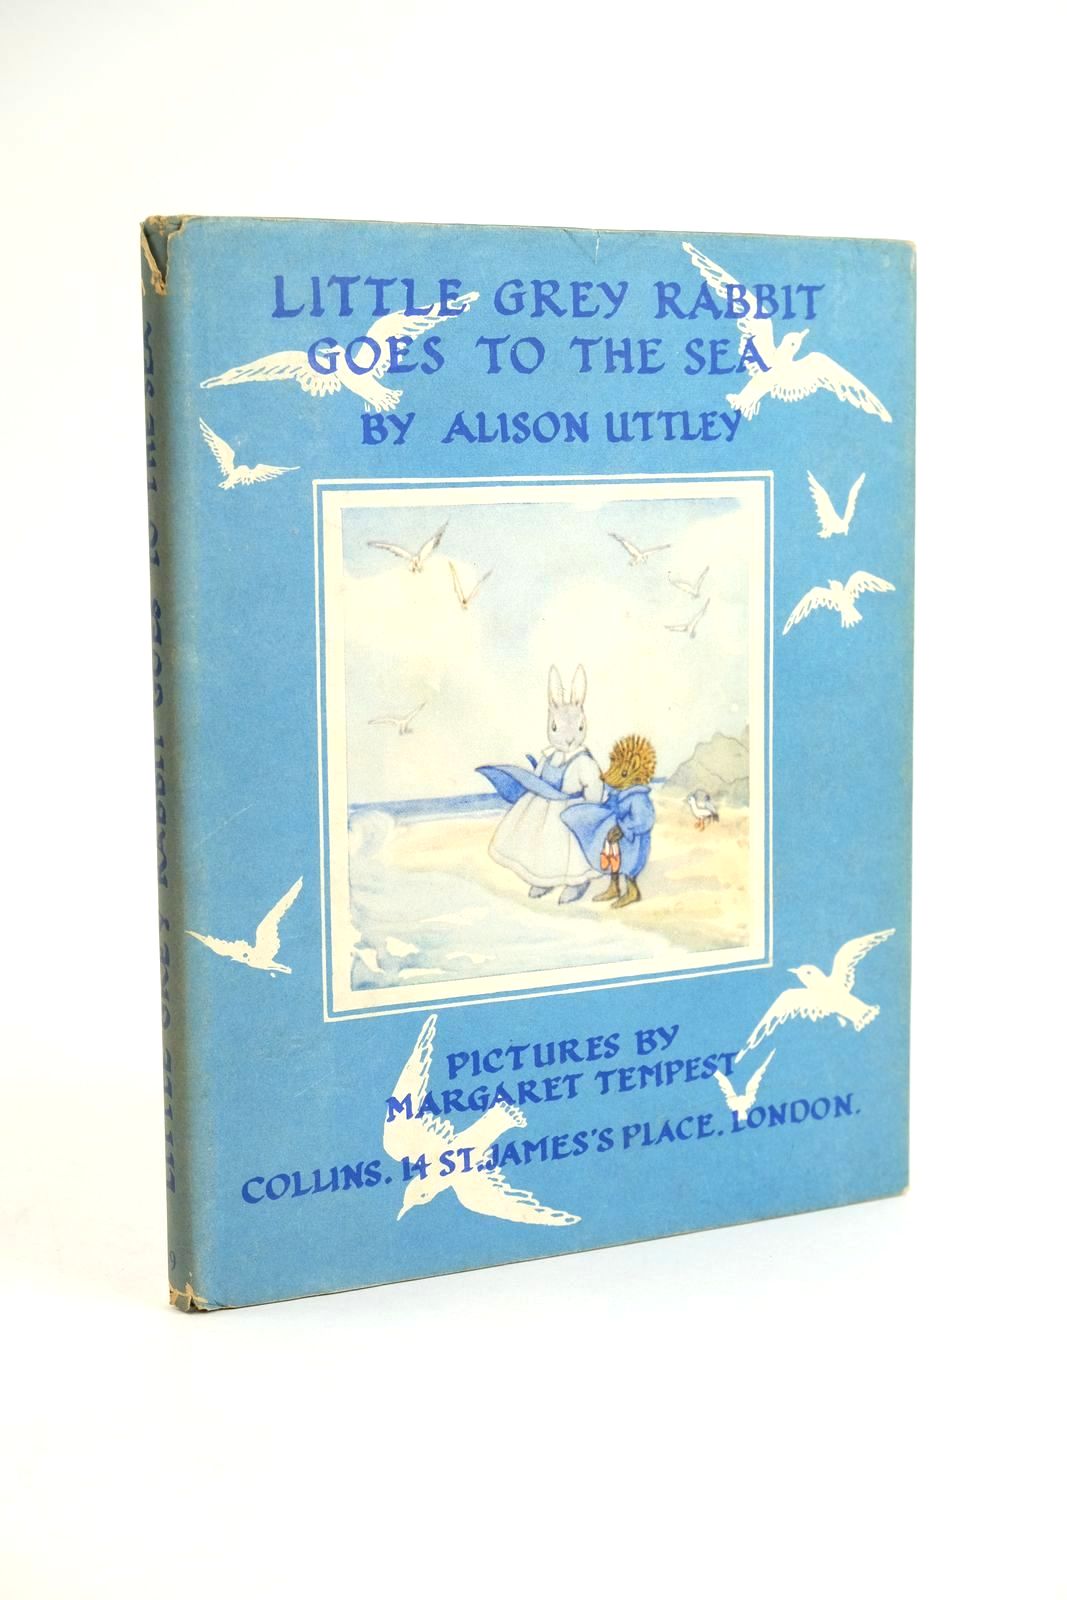 Photo of LITTLE GREY RABBIT GOES TO THE SEA written by Uttley, Alison illustrated by Tempest, Margaret published by Collins (STOCK CODE: 1323834)  for sale by Stella & Rose's Books